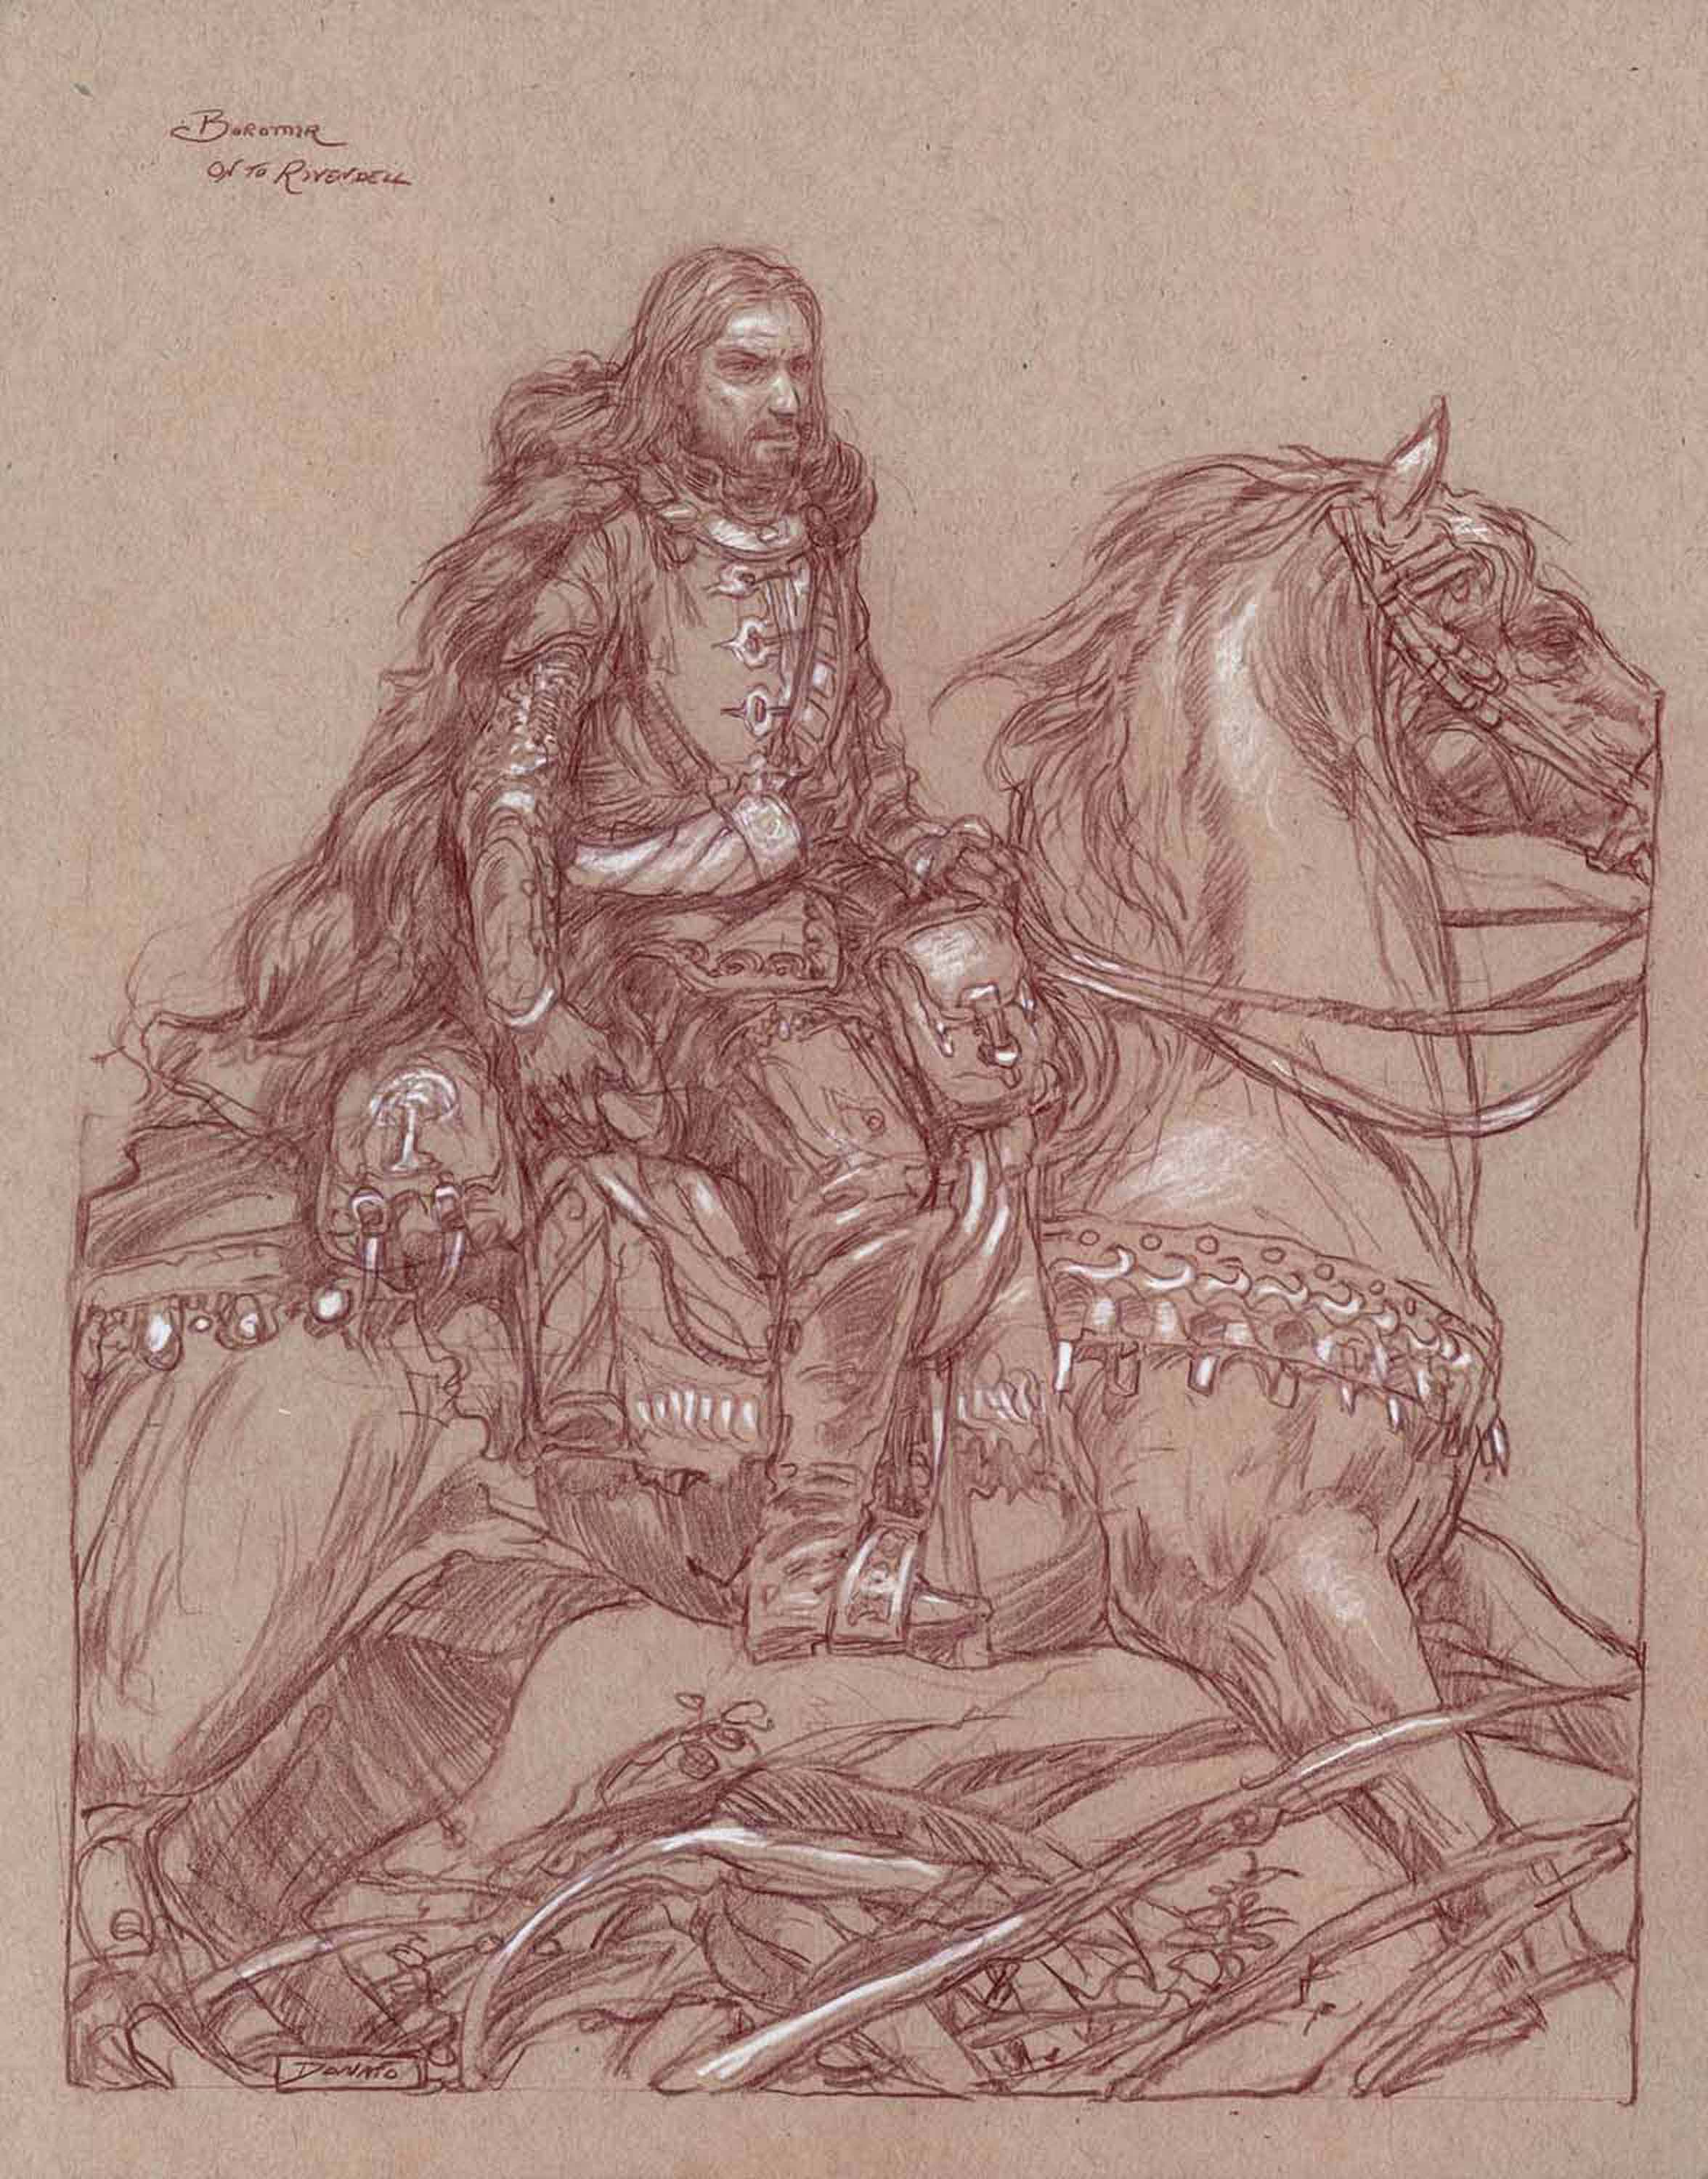 Boromir - On to Rivendell
14" x11"  Watercolor Pencil and Chalk on Toned paper 2013
private collection